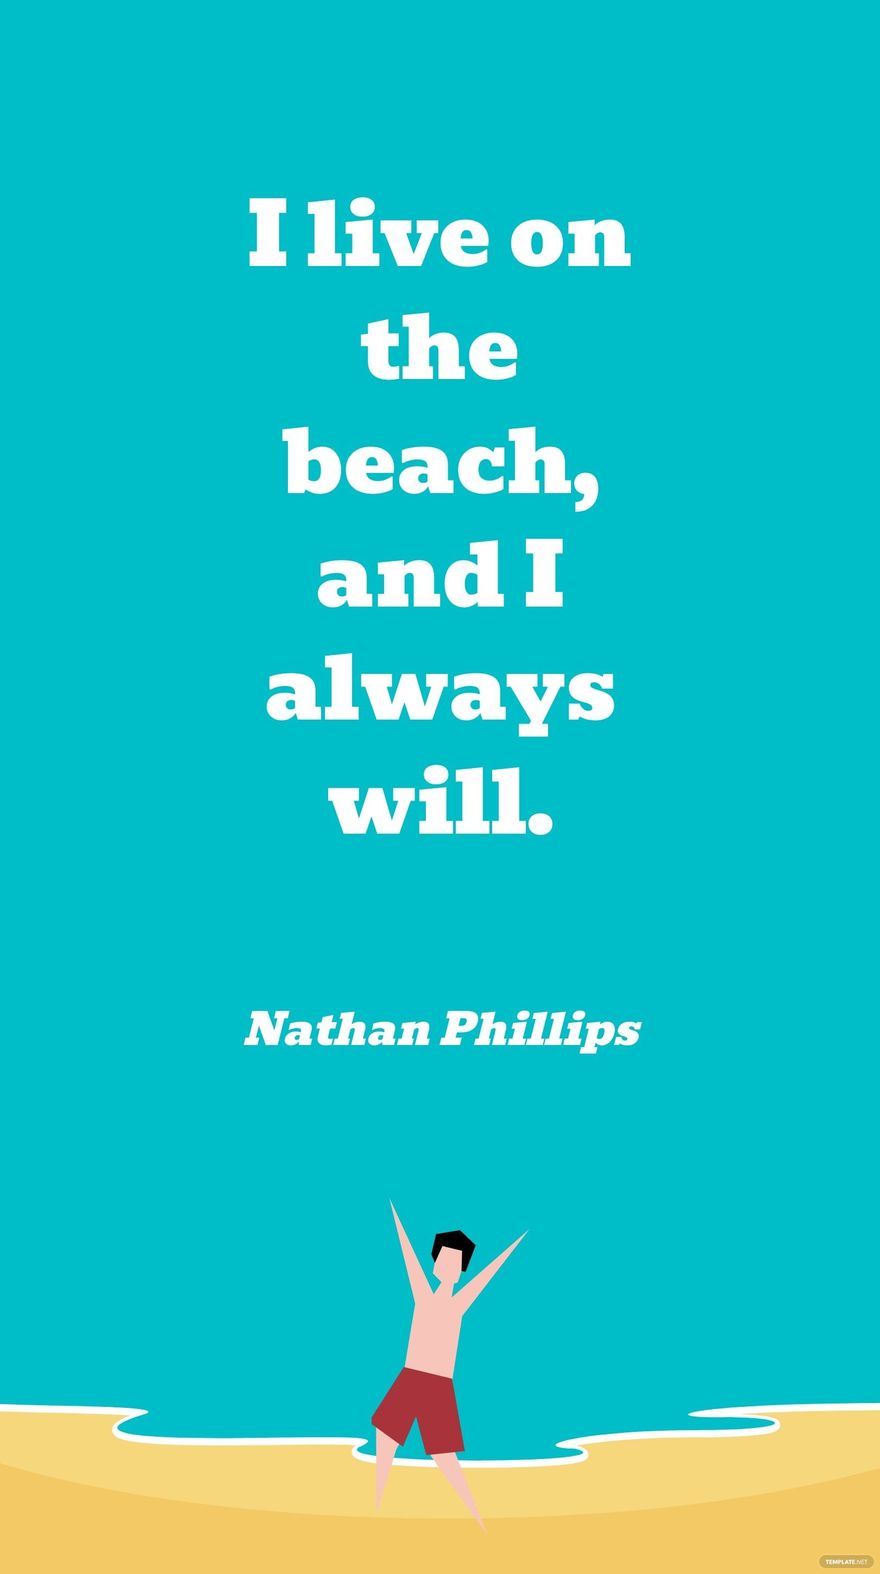 Free Nathan Phillips - I live on the beach, and I always will.